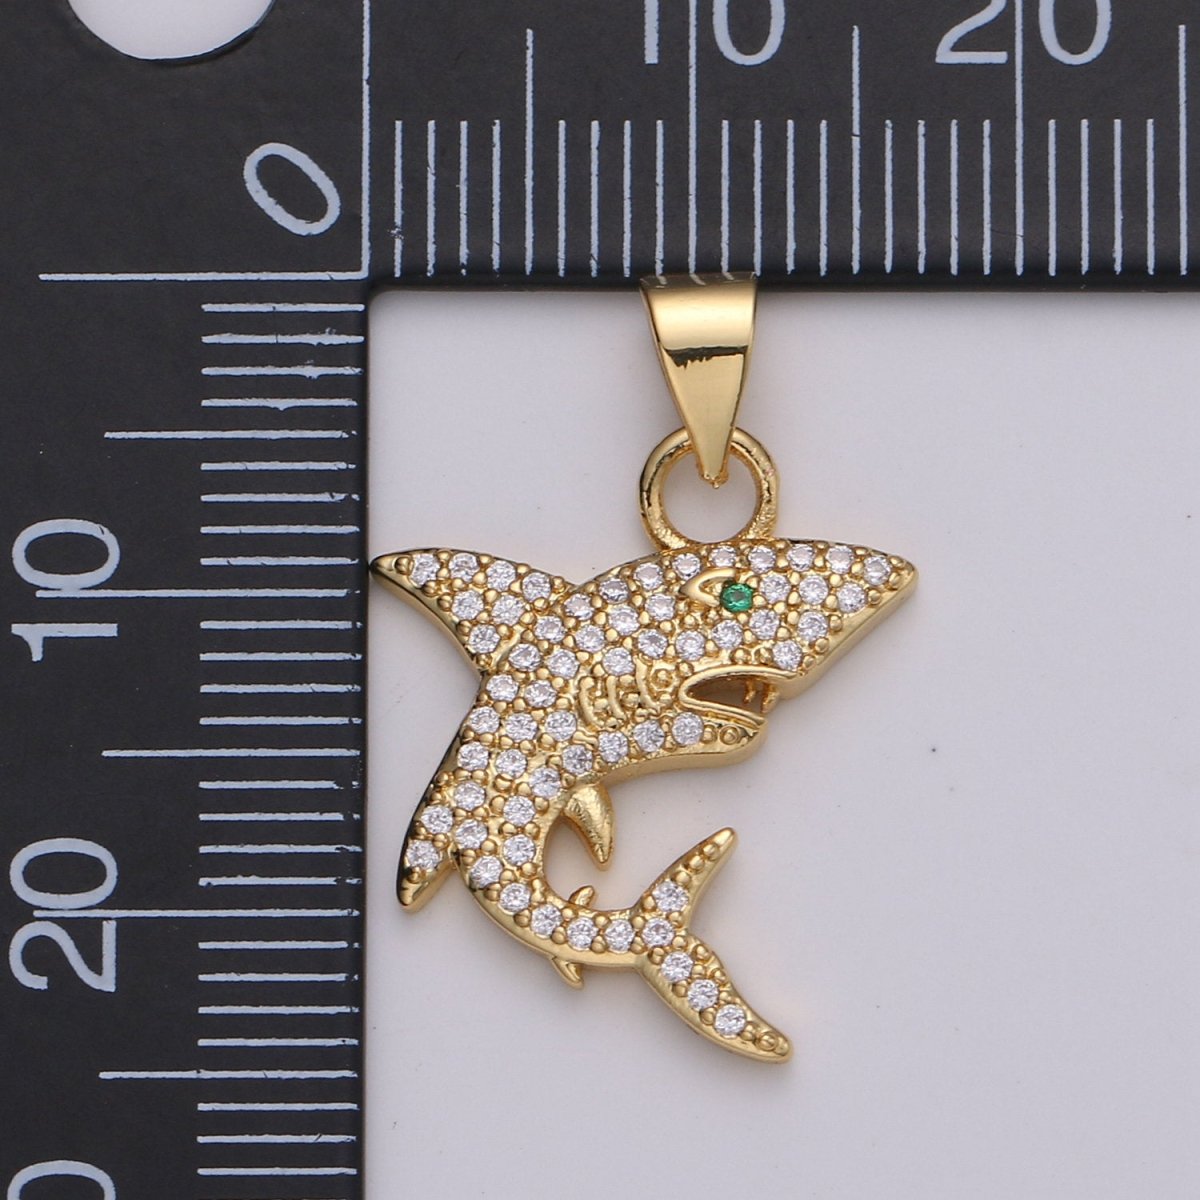 Micro Pave Shark 24K Gold Filled Charms, Gold Filled Fish Charm, Gold Baby Shark Under the sea Jewelry Inspired I-800 - DLUXCA